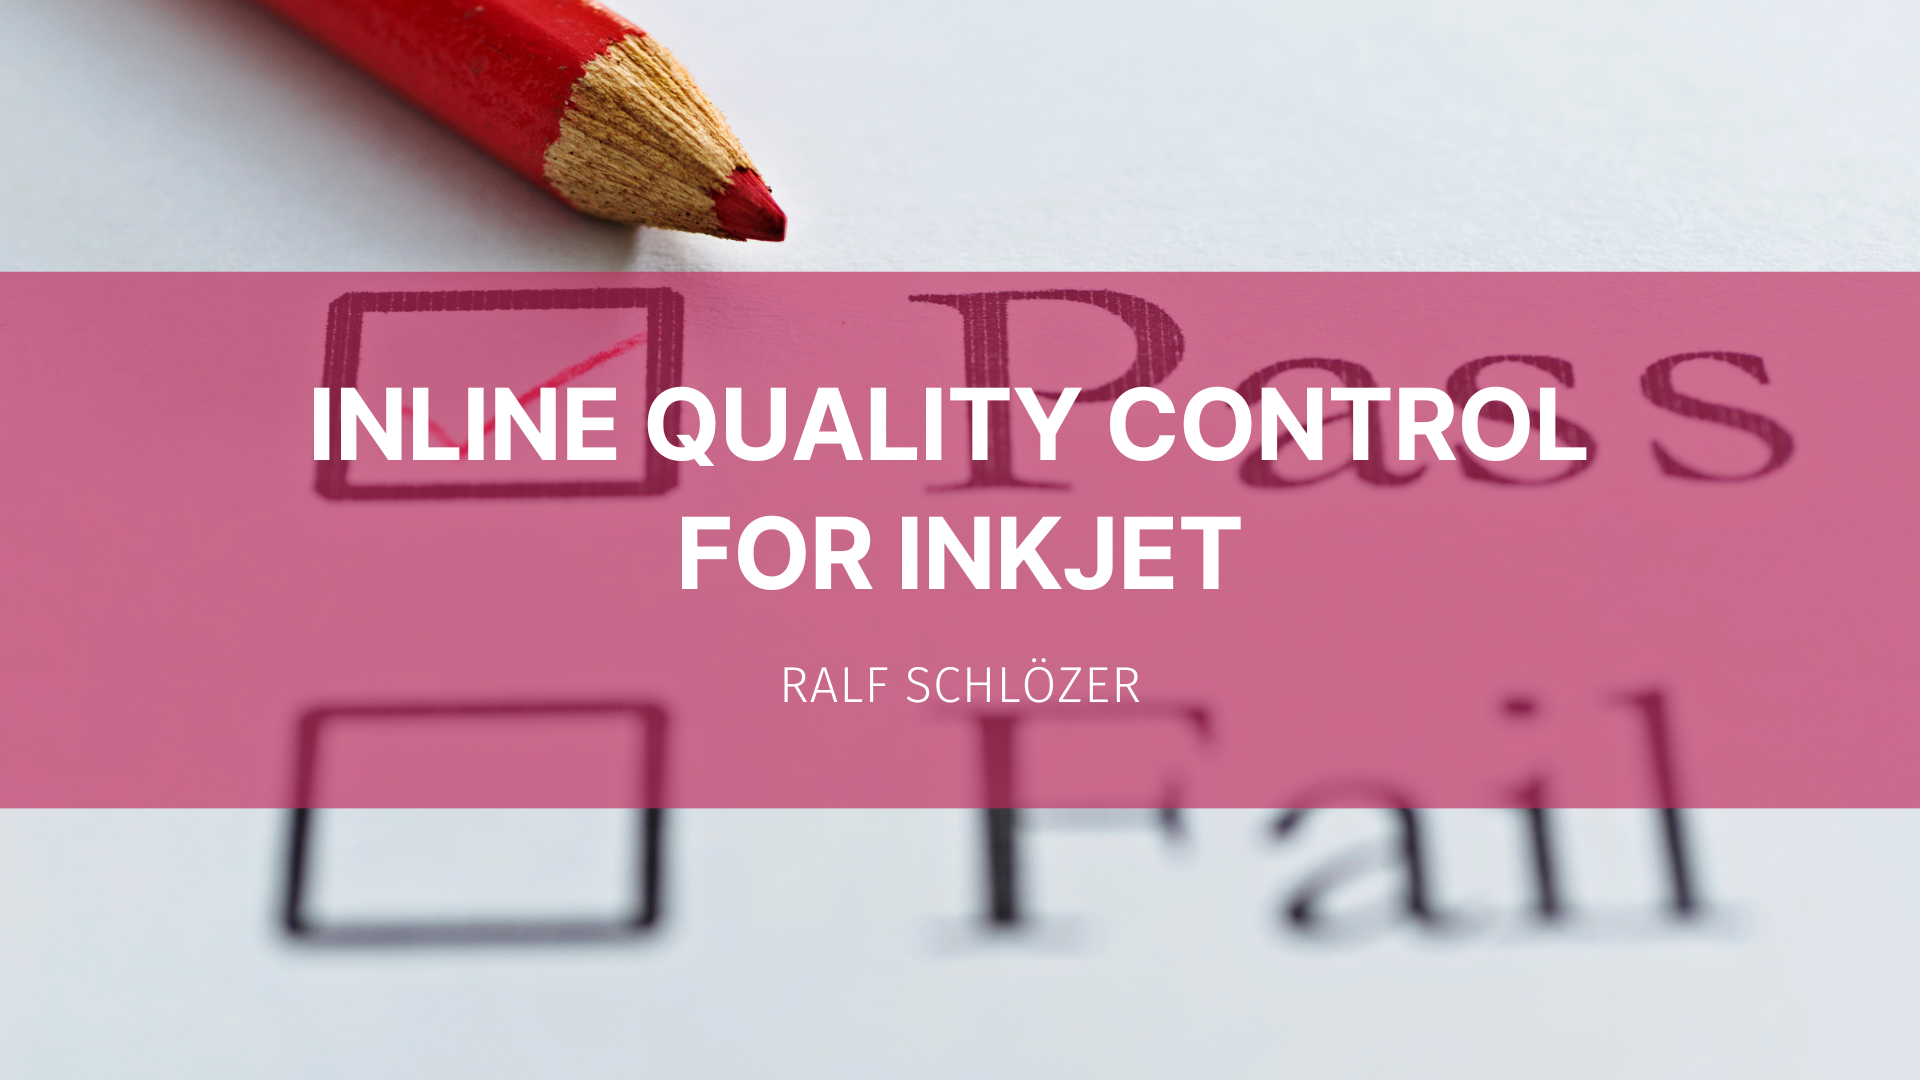 Featured image for “Inline Quality Control for Inkjet”